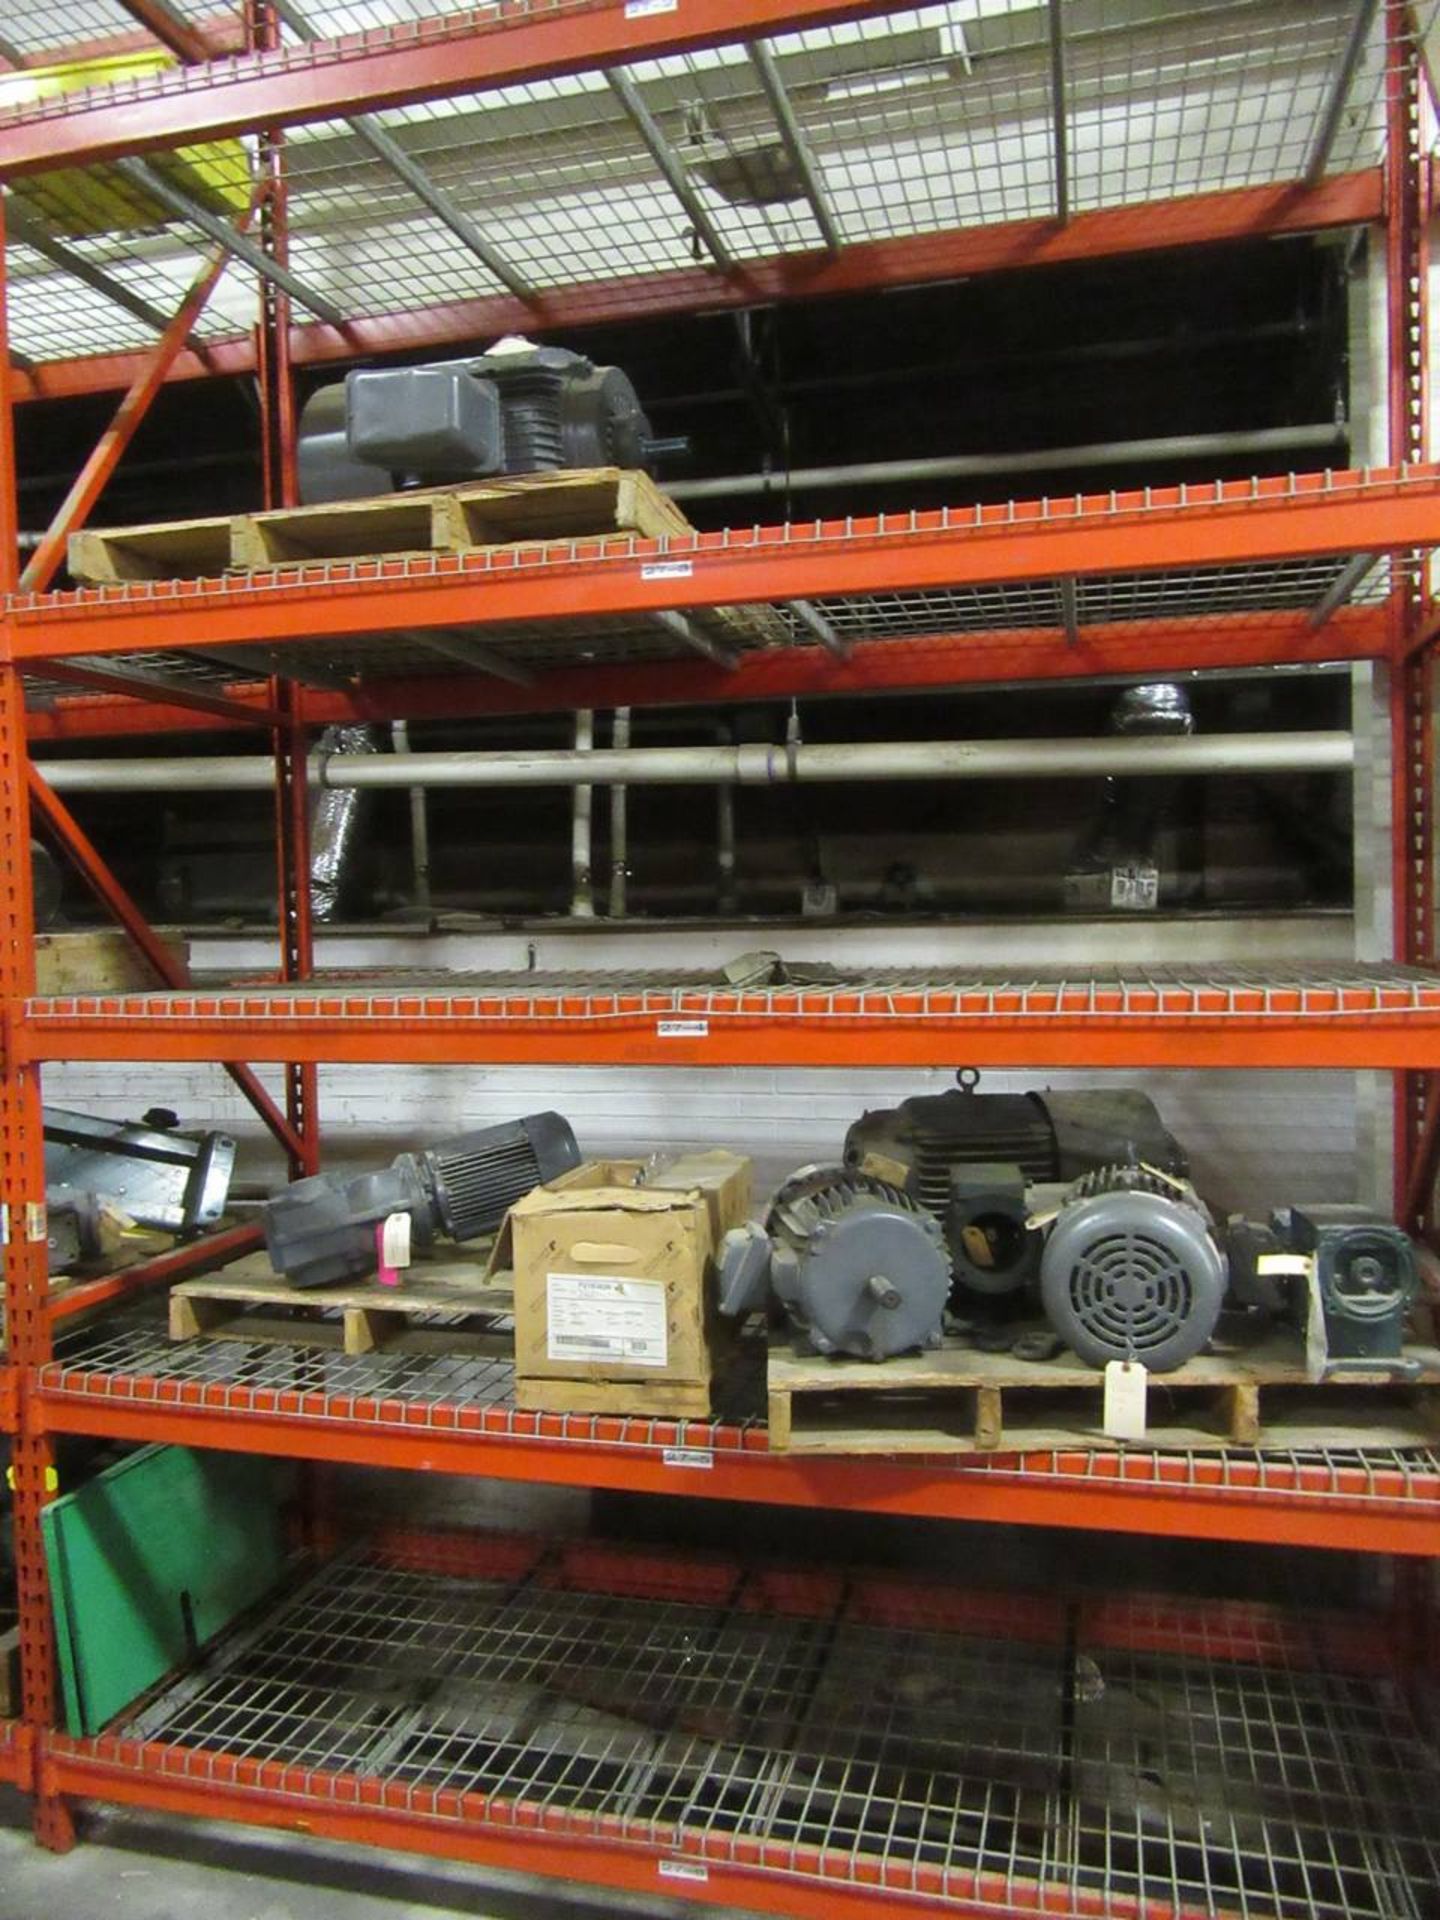 Contents of Tooling Room - Image 9 of 18